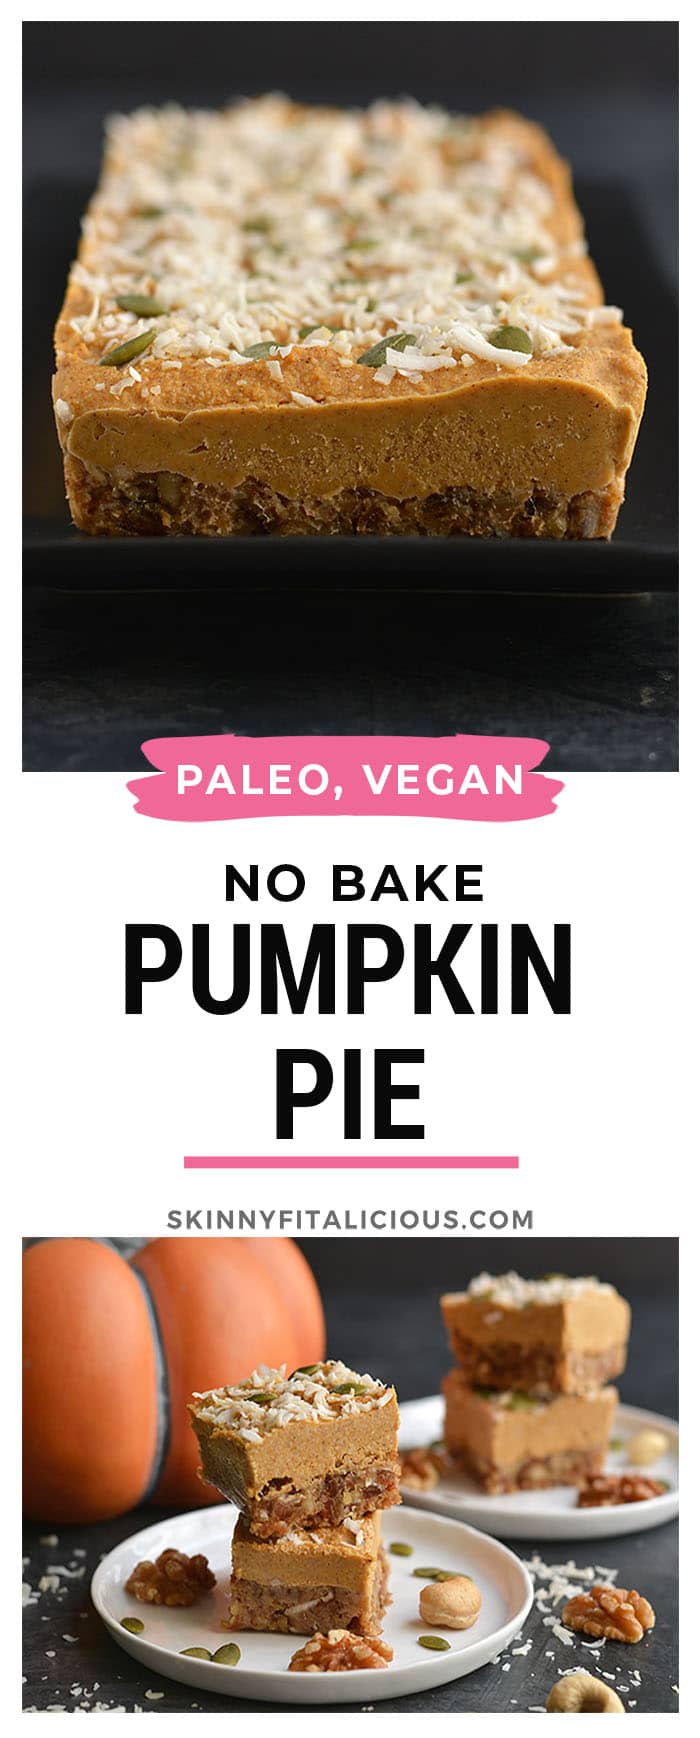 No Bake Raw Pumpkin Pie! Made with a walnut, date base and topped with a creamy, cashew pumpkin custard, this is what pumpkin pie dreams are made of. No baking required! Serve as a dessert or healthy snack. Paleo + Vegan + Low Calorie